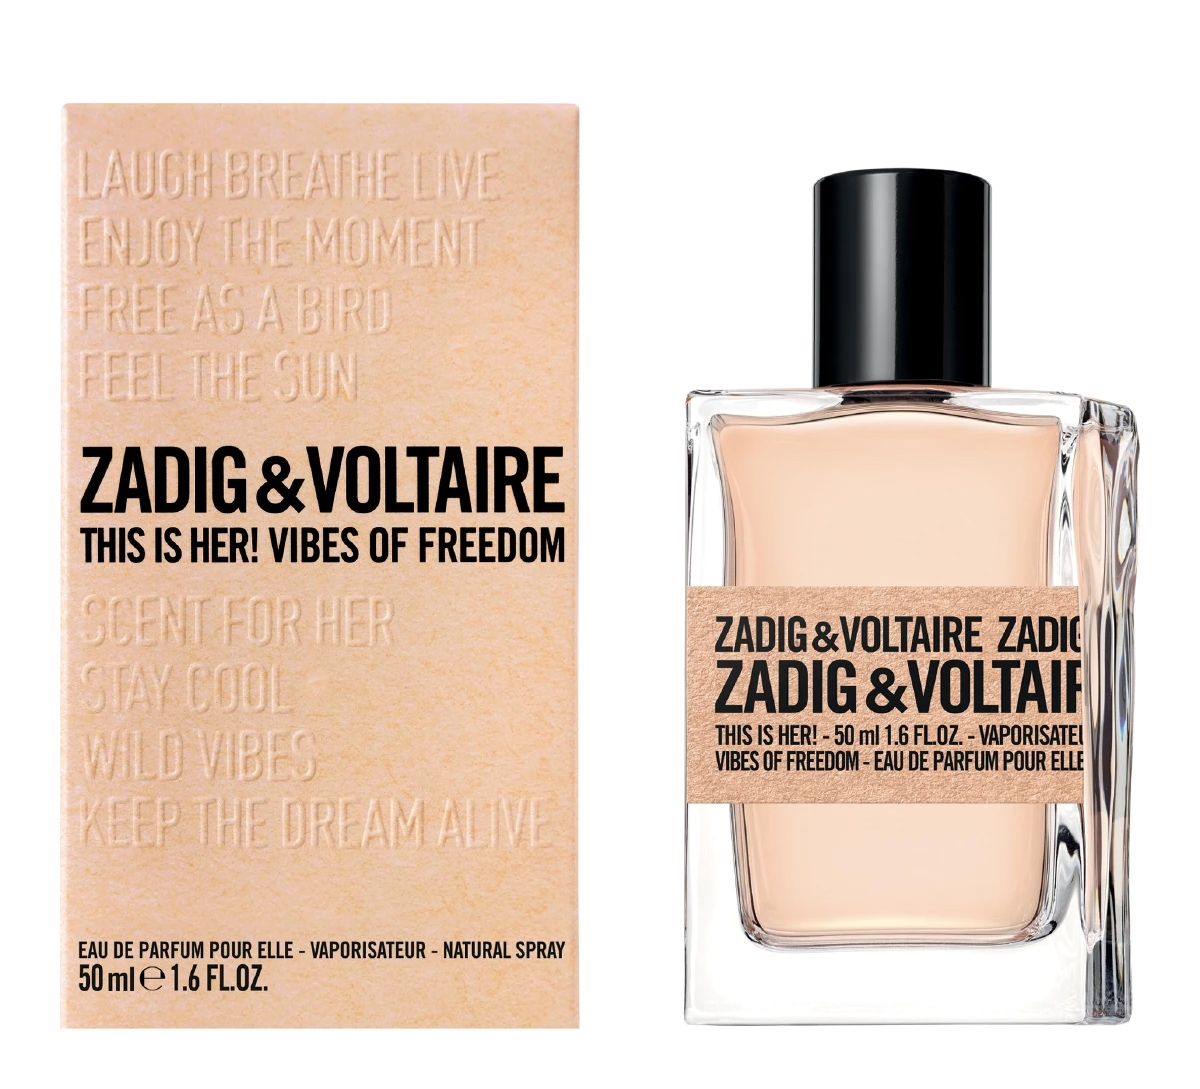 The Newest Zadig & Voltaire Vibes Of Freedom Duo ~ New Fragrances